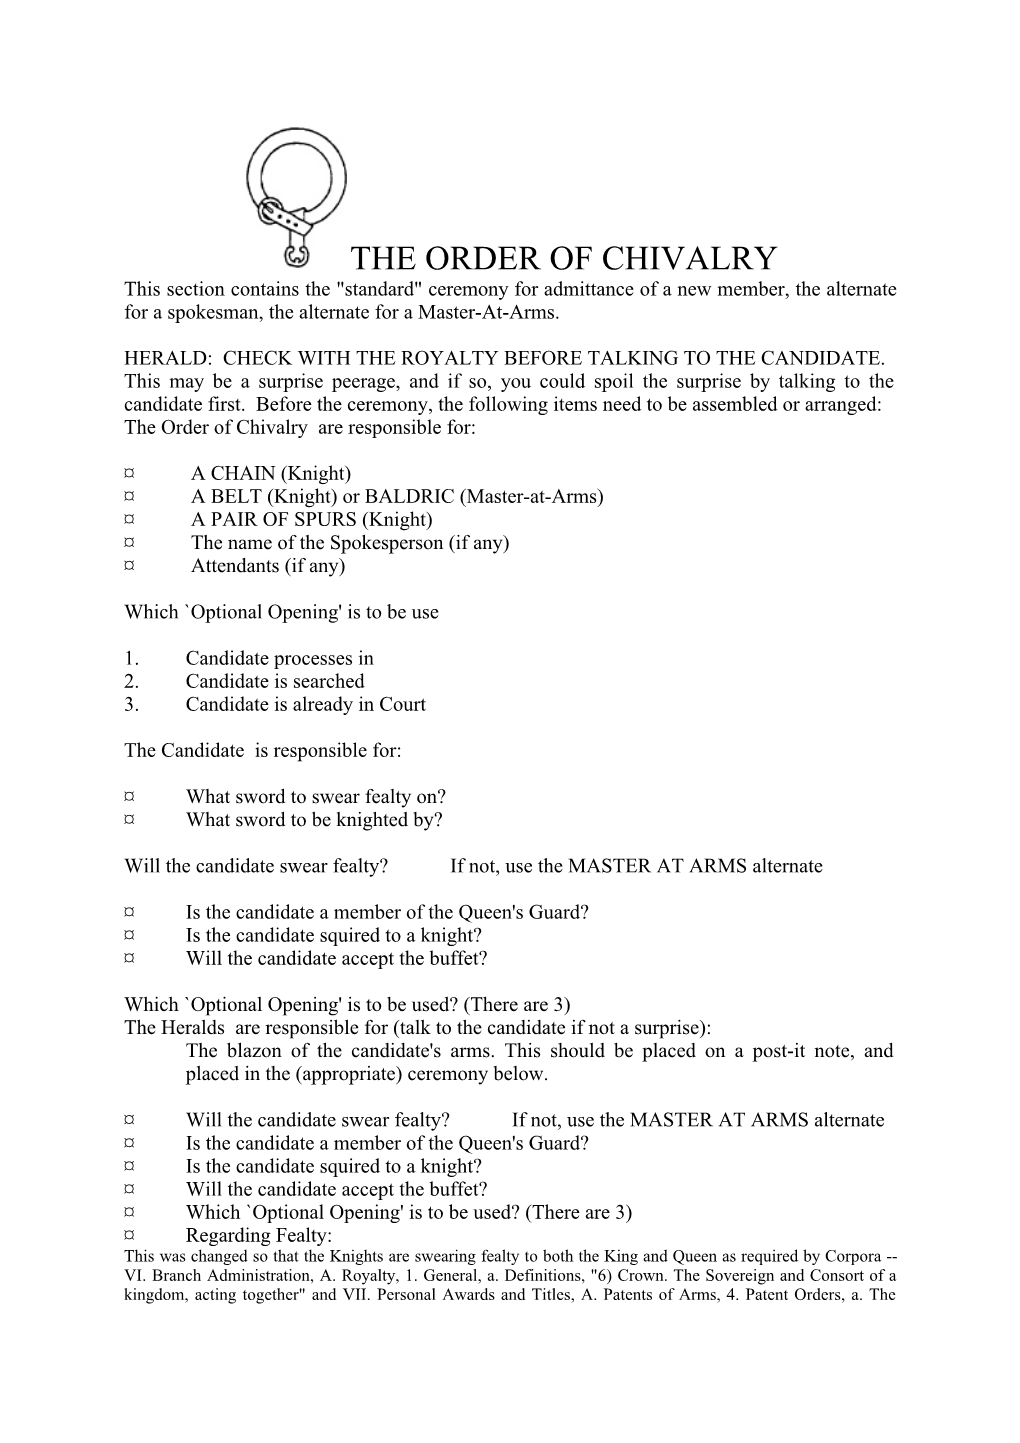 THE ORDER of CHIVALRY This Section Contains the "Standard" Ceremony for Admittance of a New Member, the Alternate for a Spokesman, the Alternate for a Master-At-Arms